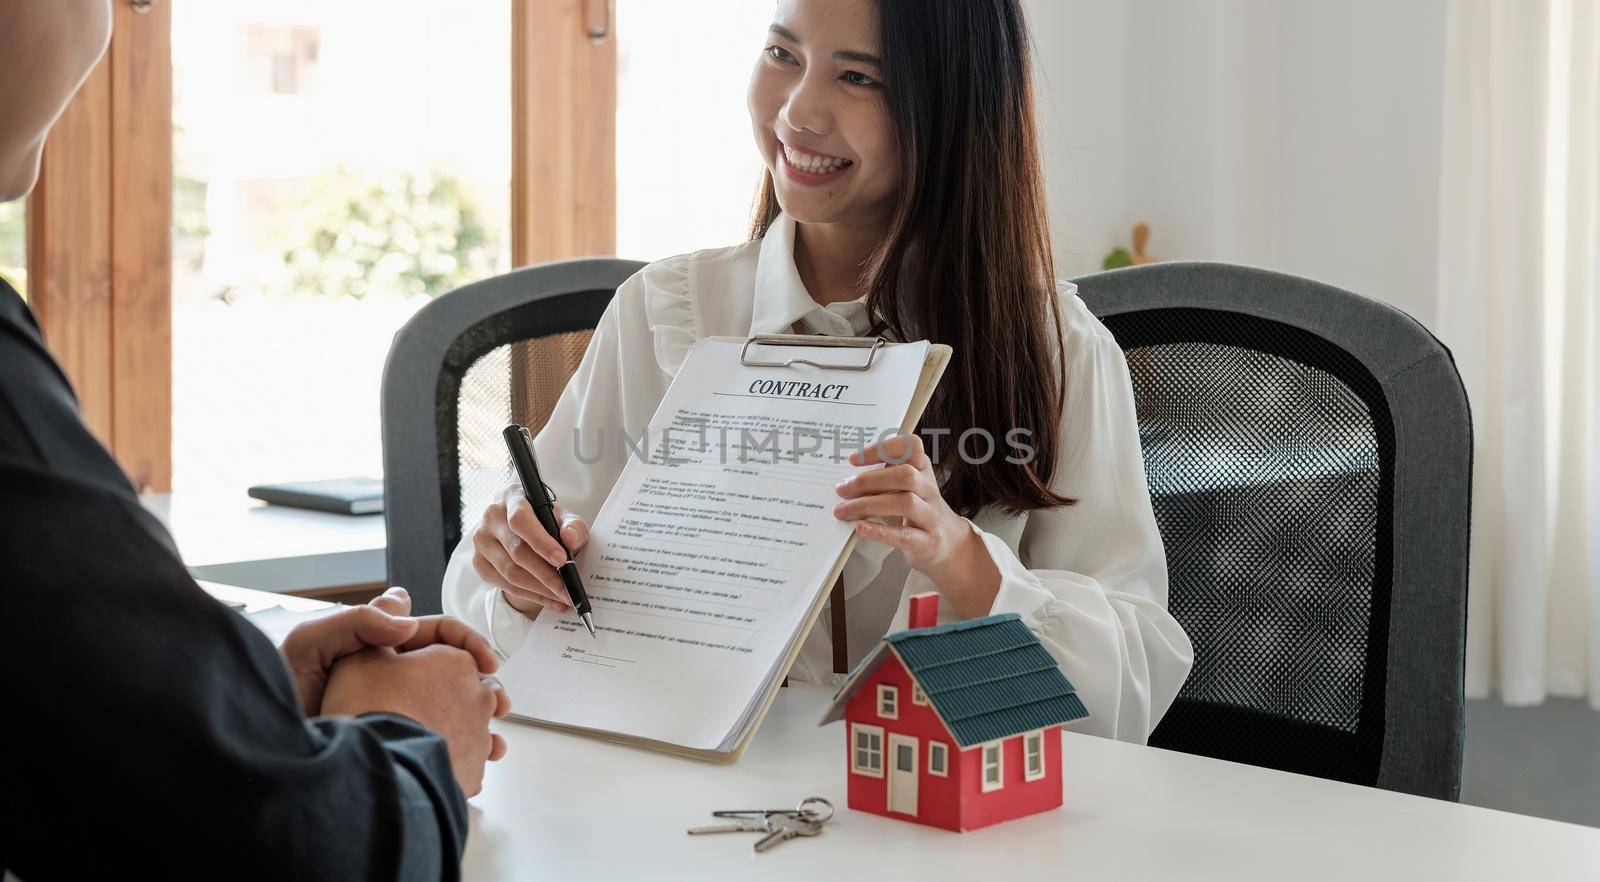 Real estate brokers point to a contract paper and advise customers to sign their names. customer sign agreement contract signature for buy or sell house. Real estate concept contact agreement concept.